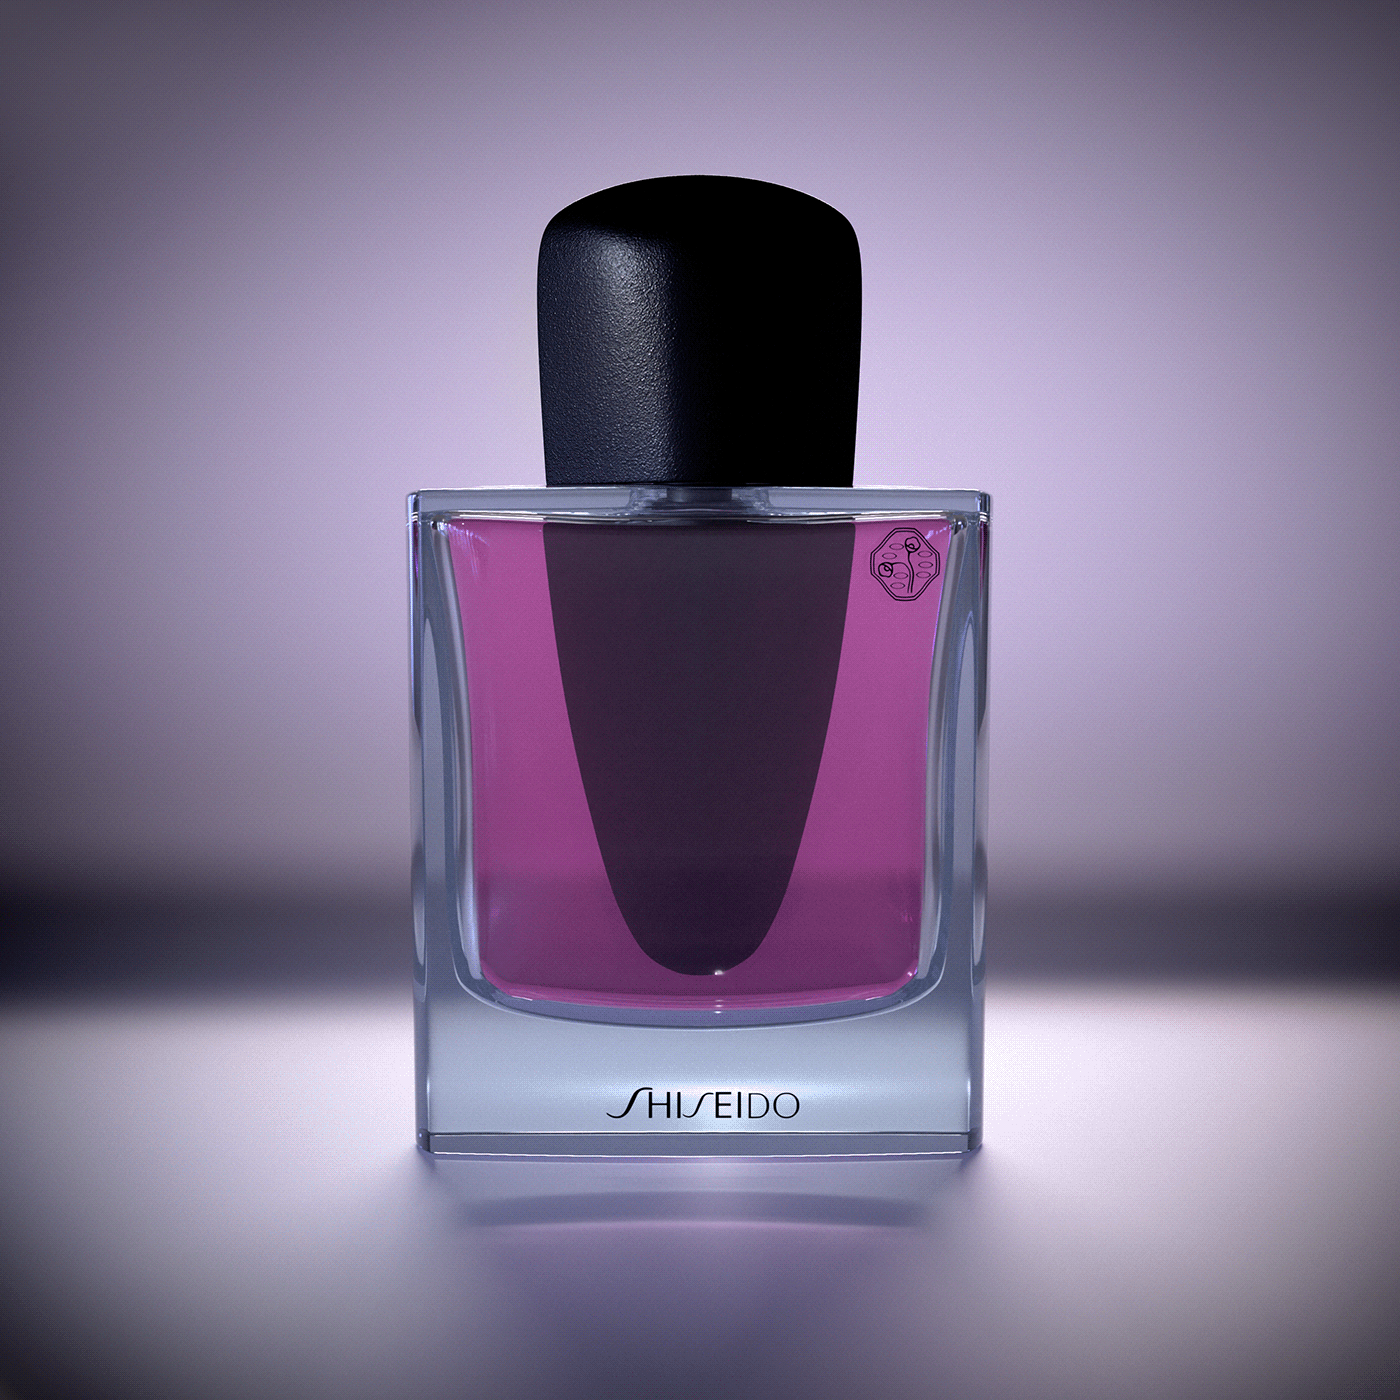 perfume 3D product modelling realistic renders  3d modeling visualization Render 3ds max blender